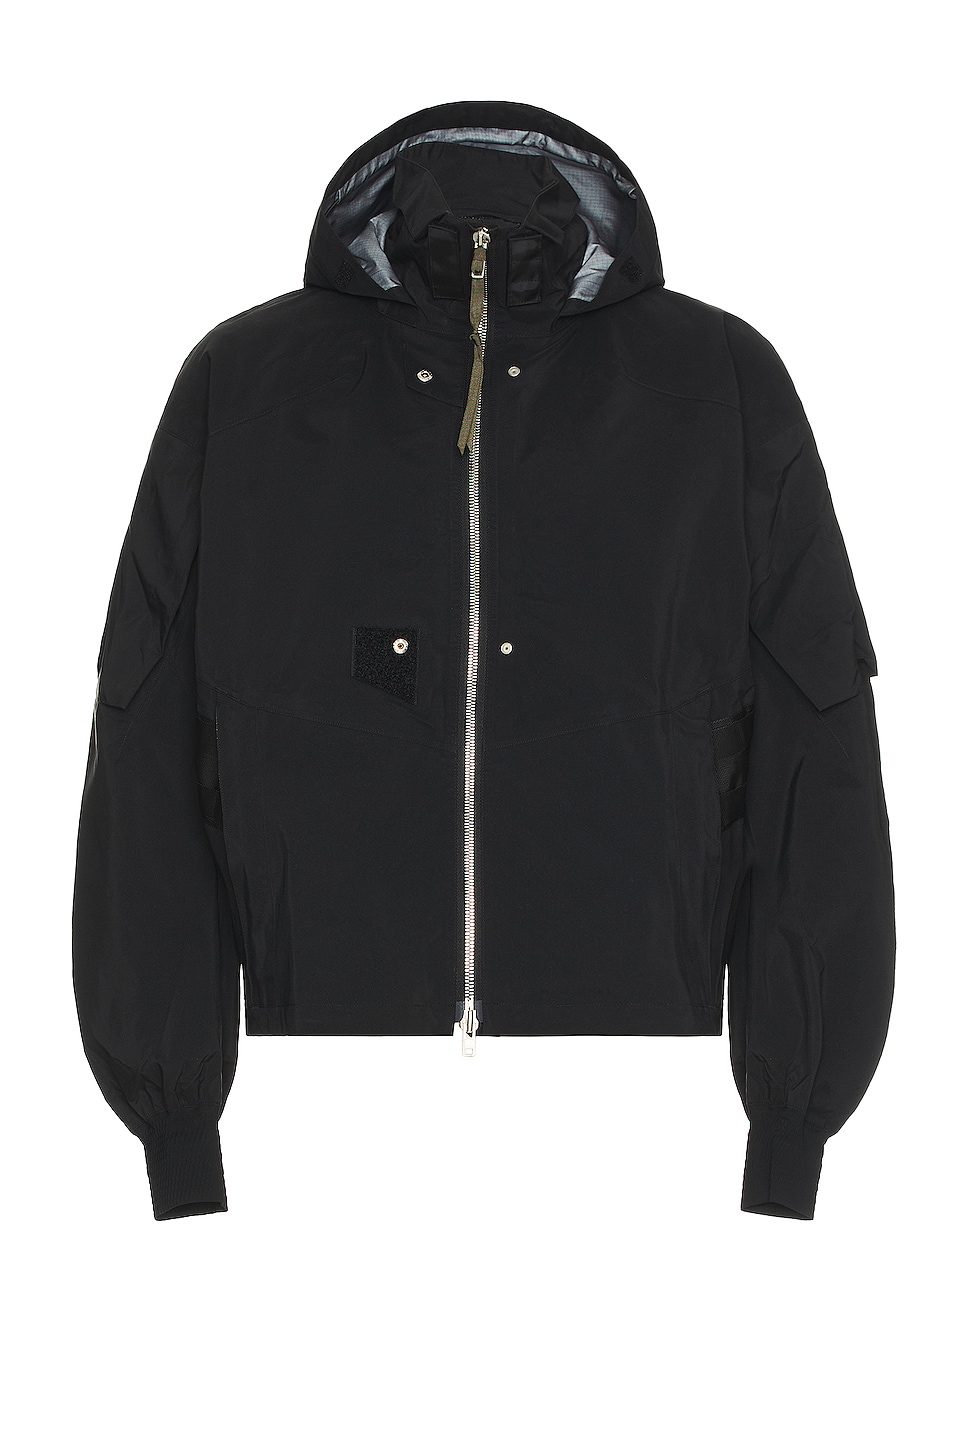 Image 1 of Acronym J110ts-gt 3l Gore-tex Pro Tec Sys Jacket in Black